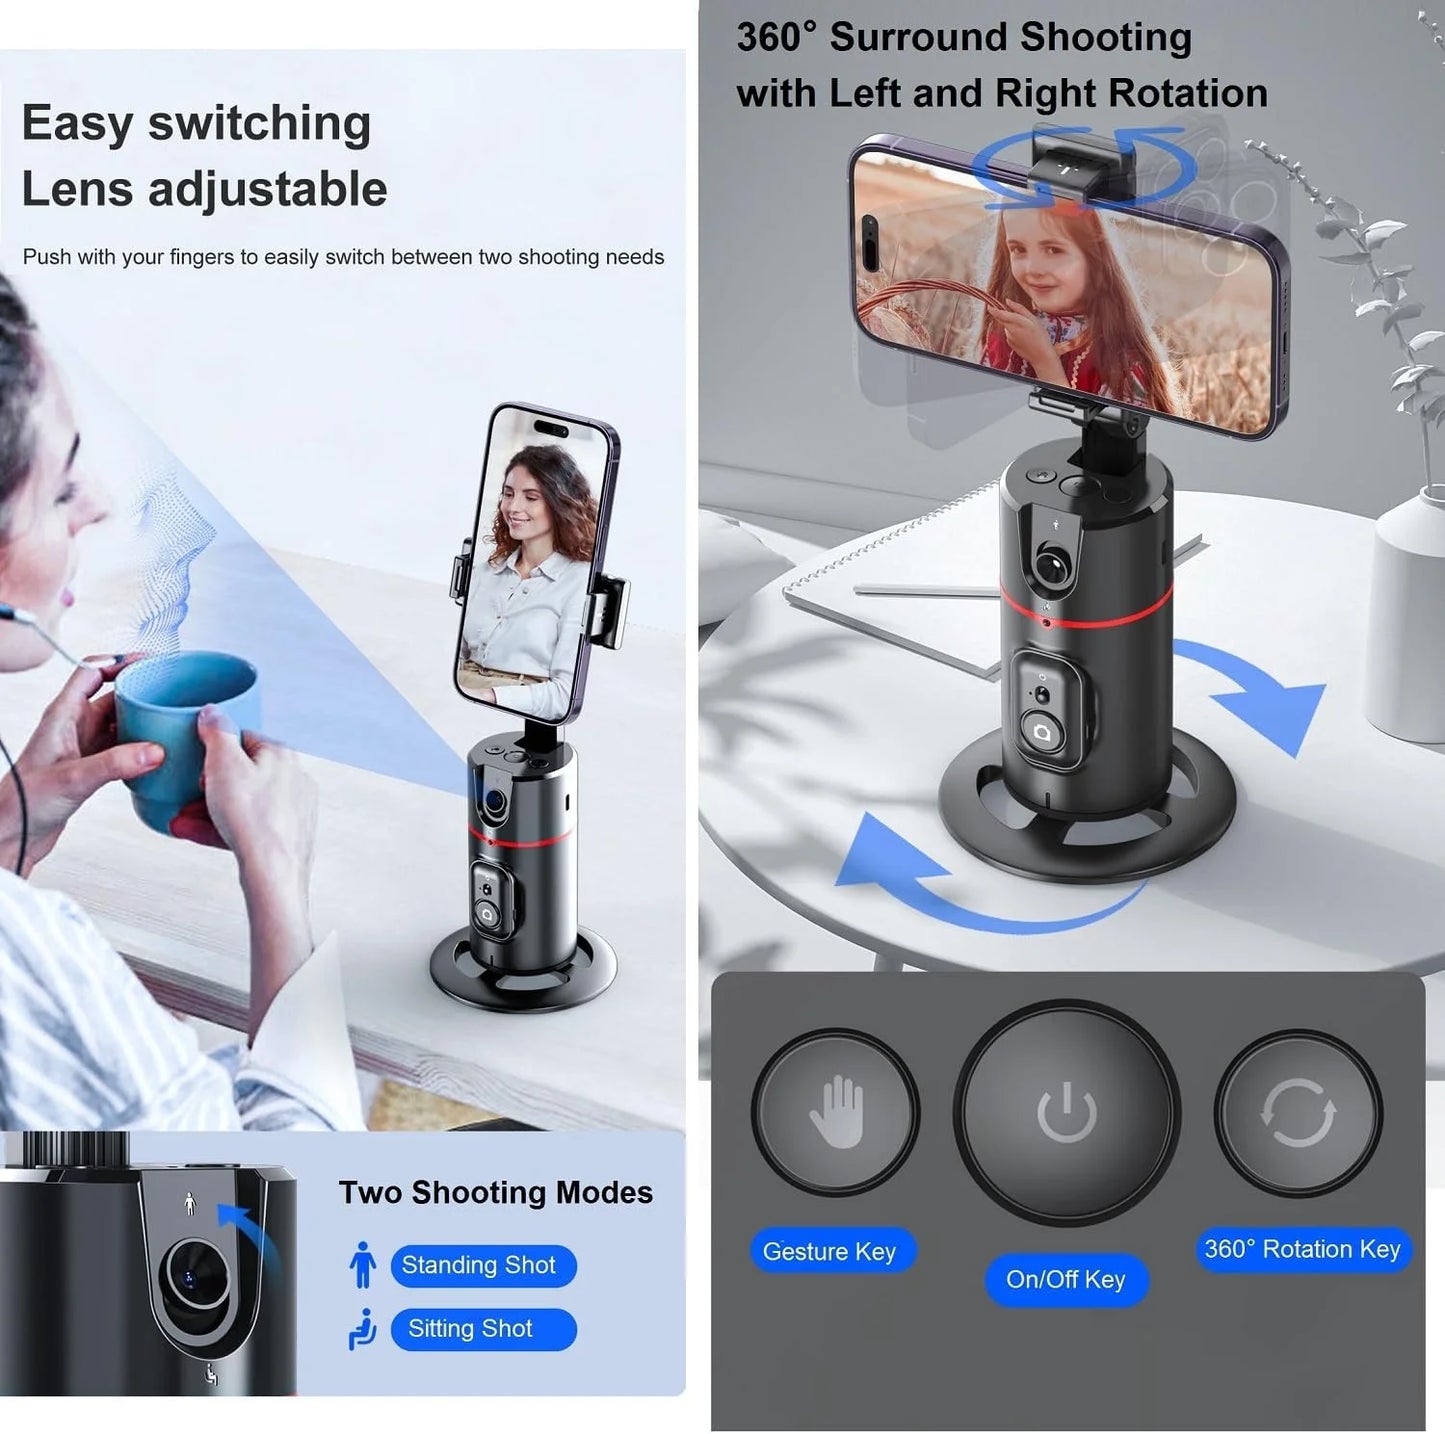 Auto Face Tracking Phone Holder Tripod, No App Required, 360° Rotation Smart Face Body Tracking Tripod Selfie Phone Camera Mount Cell Phone Stand for TIK Tok, Vlog, Live Streaming, Youtube Video